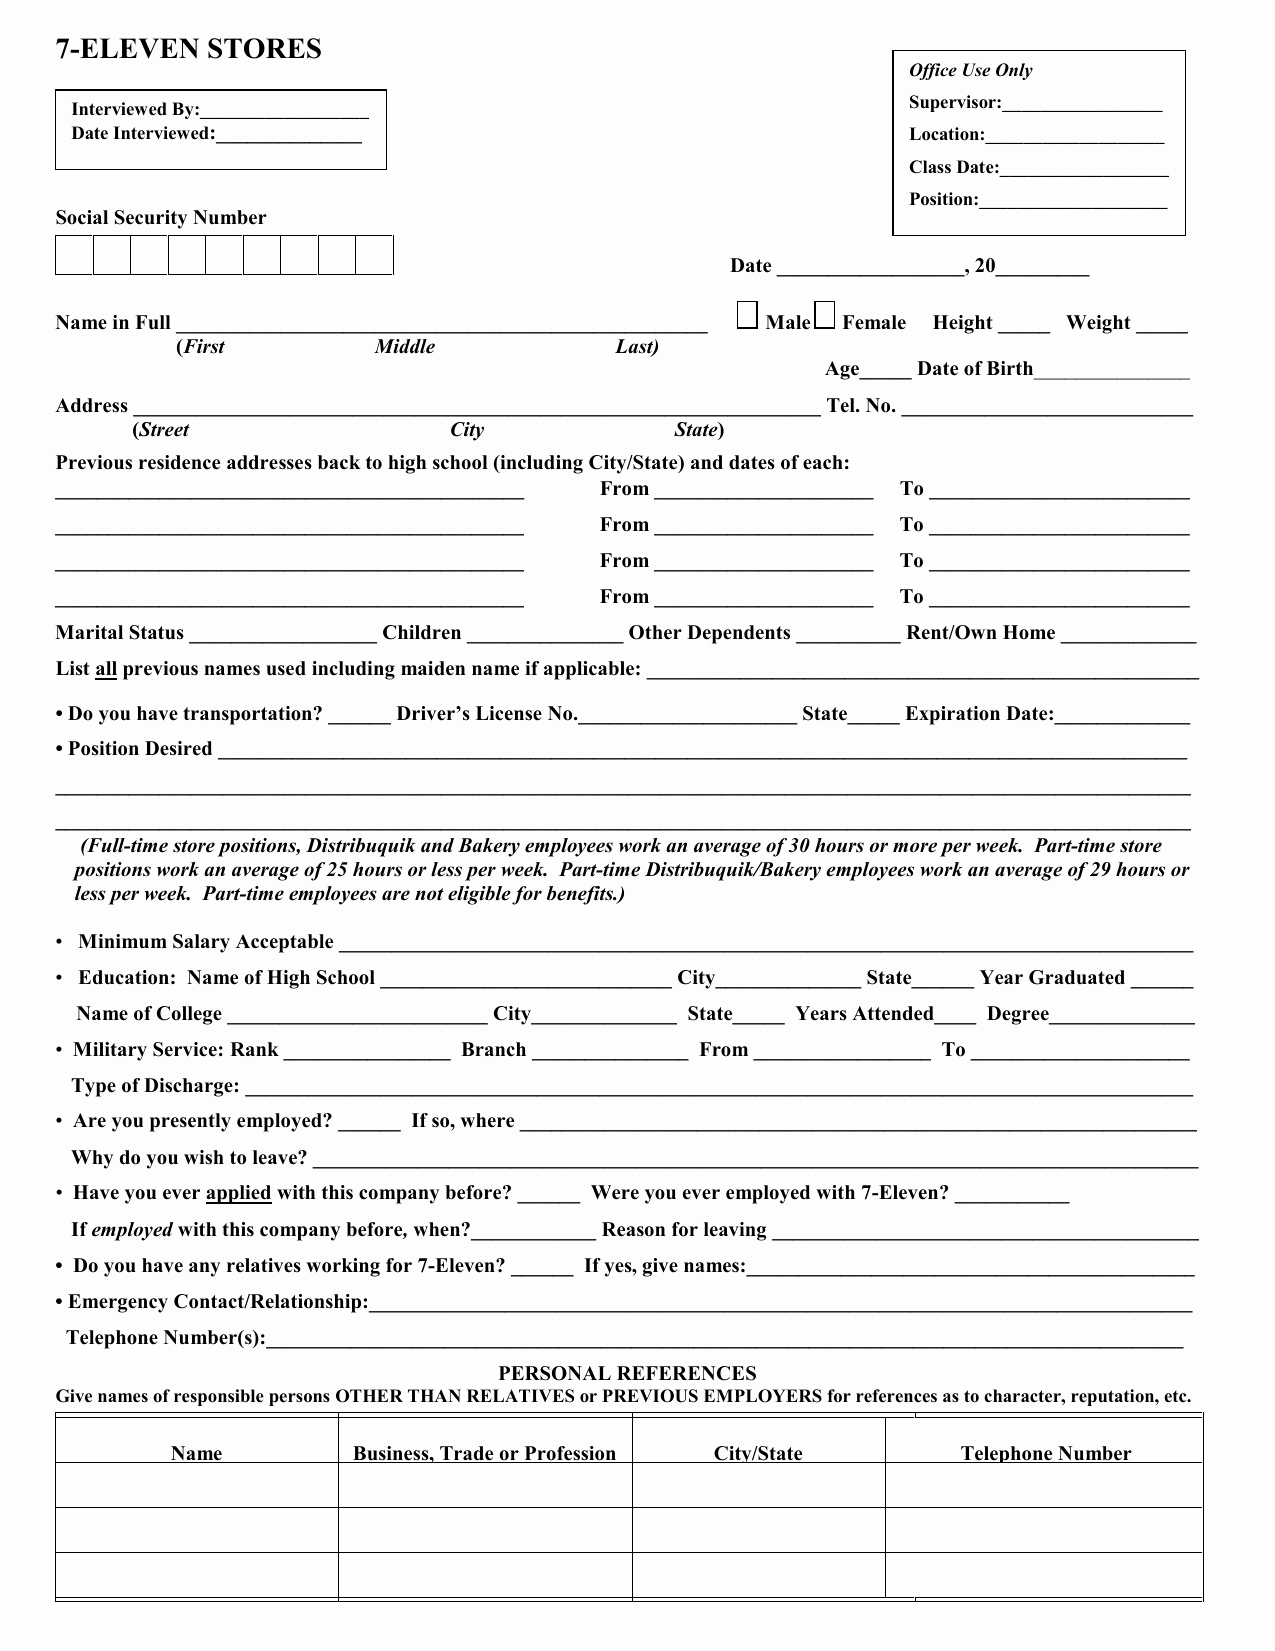 Retail Application form Awesome Download 7 Eleven Job Application form